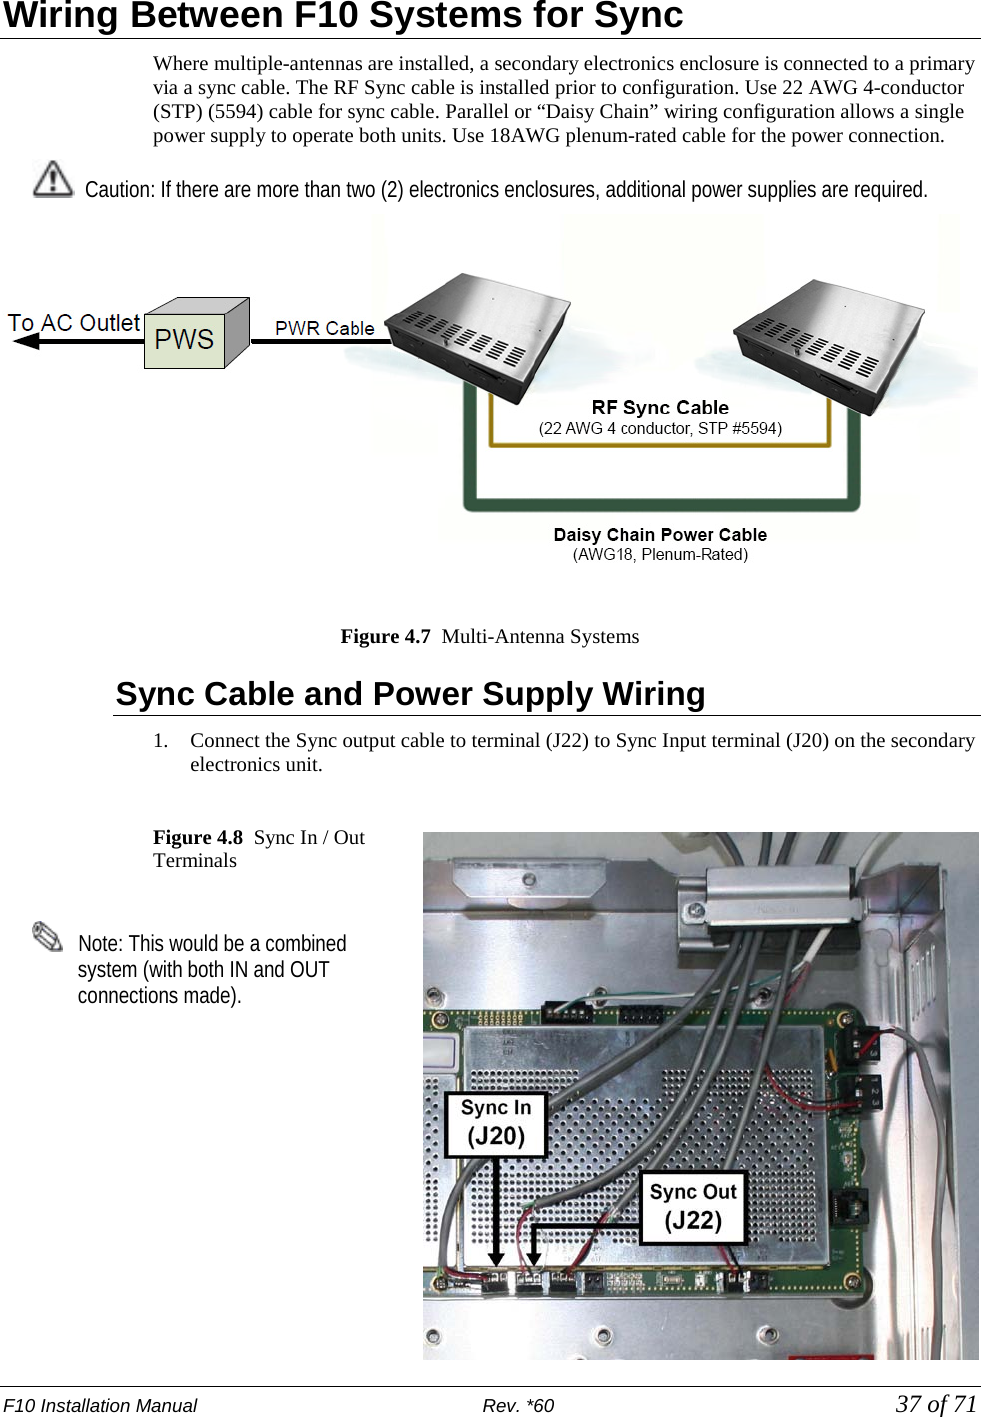 F10 Installation Manual                          Rev. *60            37 of 71 Wiring Between F10 Systems for Sync Where multiple-antennas are installed, a secondary electronics enclosure is connected to a primary via a sync cable. The RF Sync cable is installed prior to configuration. Use 22 AWG 4-conductor (STP) (5594) cable for sync cable. Parallel or “Daisy Chain” wiring configuration allows a single power supply to operate both units. Use 18AWG plenum-rated cable for the power connection.   Caution: If there are more than two (2) electronics enclosures, additional power supplies are required.    Figure 4.7  Multi-Antenna Systems Sync Cable and Power Supply Wiring 1. Connect the Sync output cable to terminal (J22) to Sync Input terminal (J20) on the secondary electronics unit.   Figure 4.8  Sync In / Out Terminals      Note: This would be a combined system (with both IN and OUT connections made).     